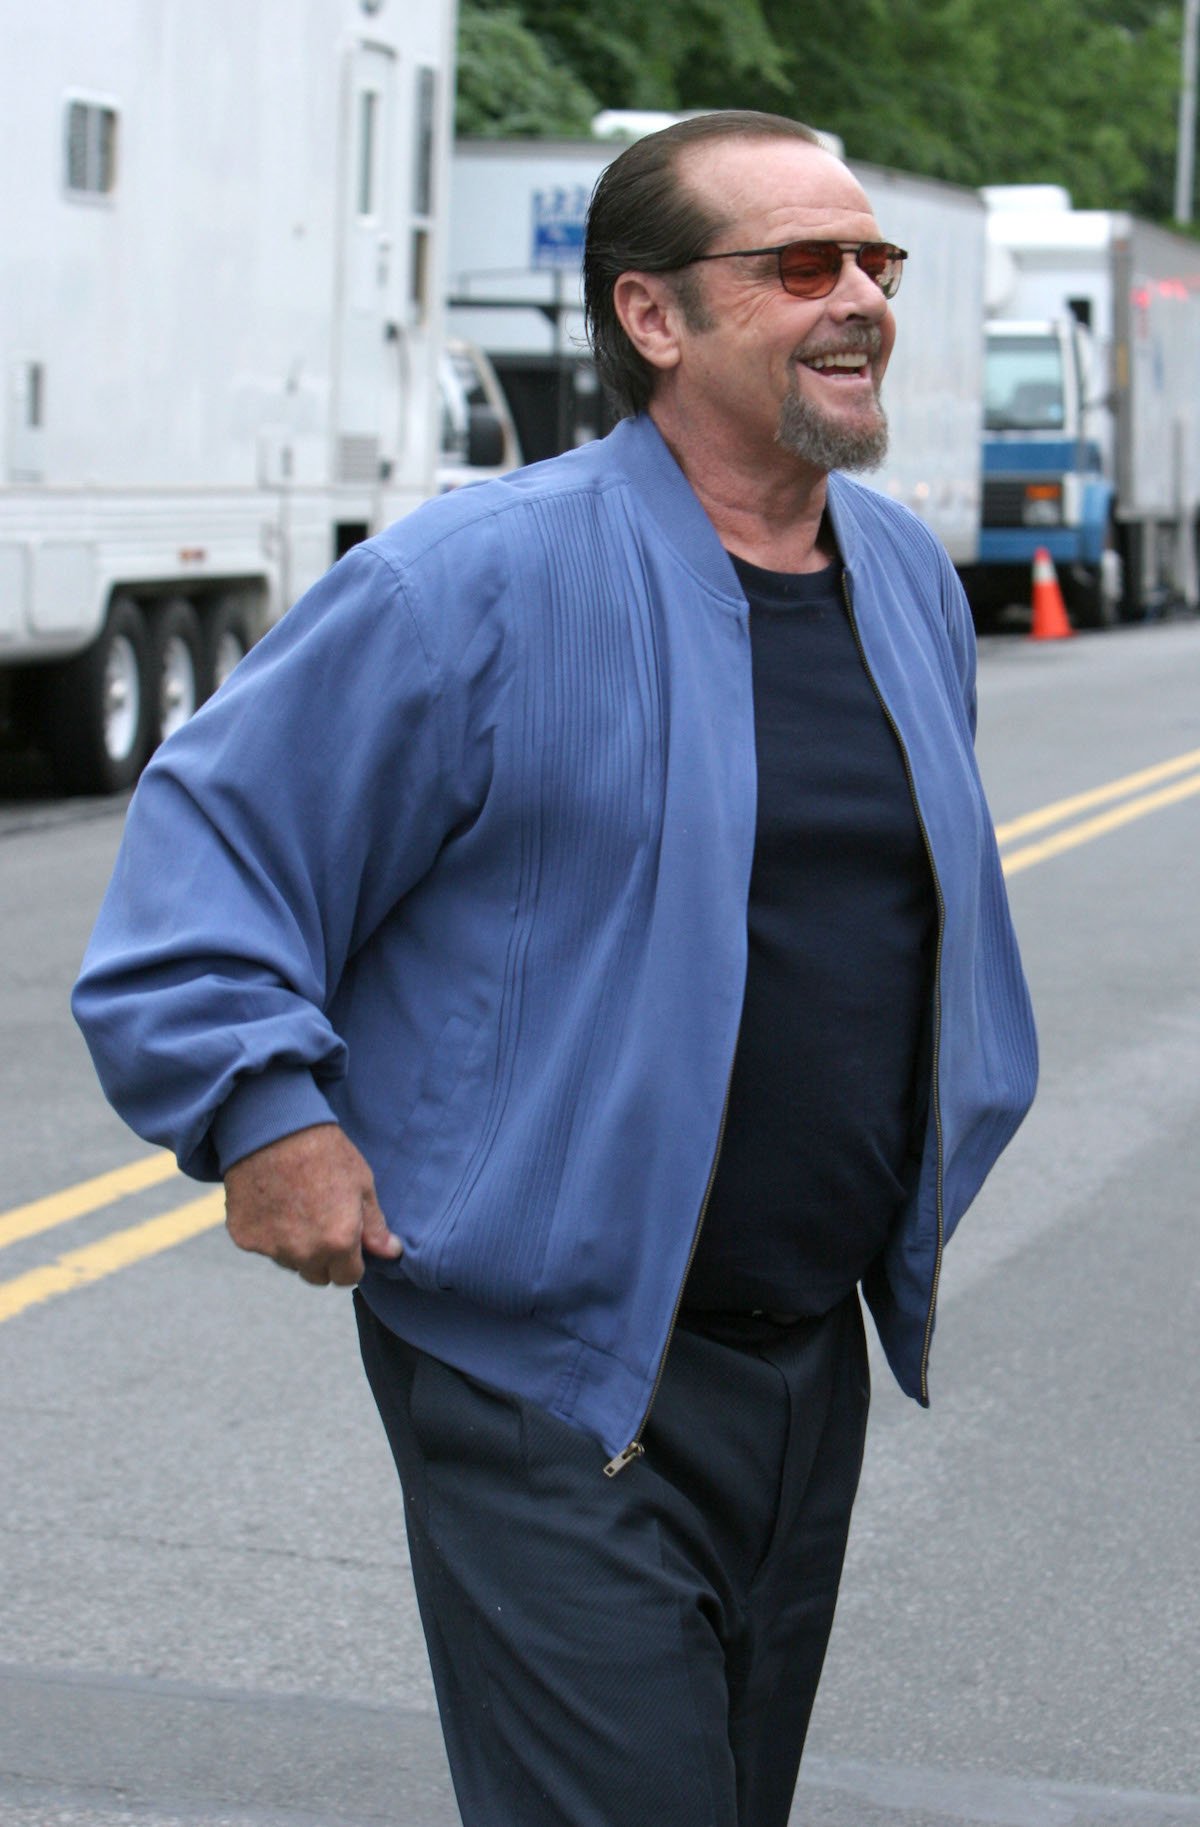 Jack Nicholson smiles wearing sunglasses, jeans, and a blue jacket on location for 'The Departed' in 2005